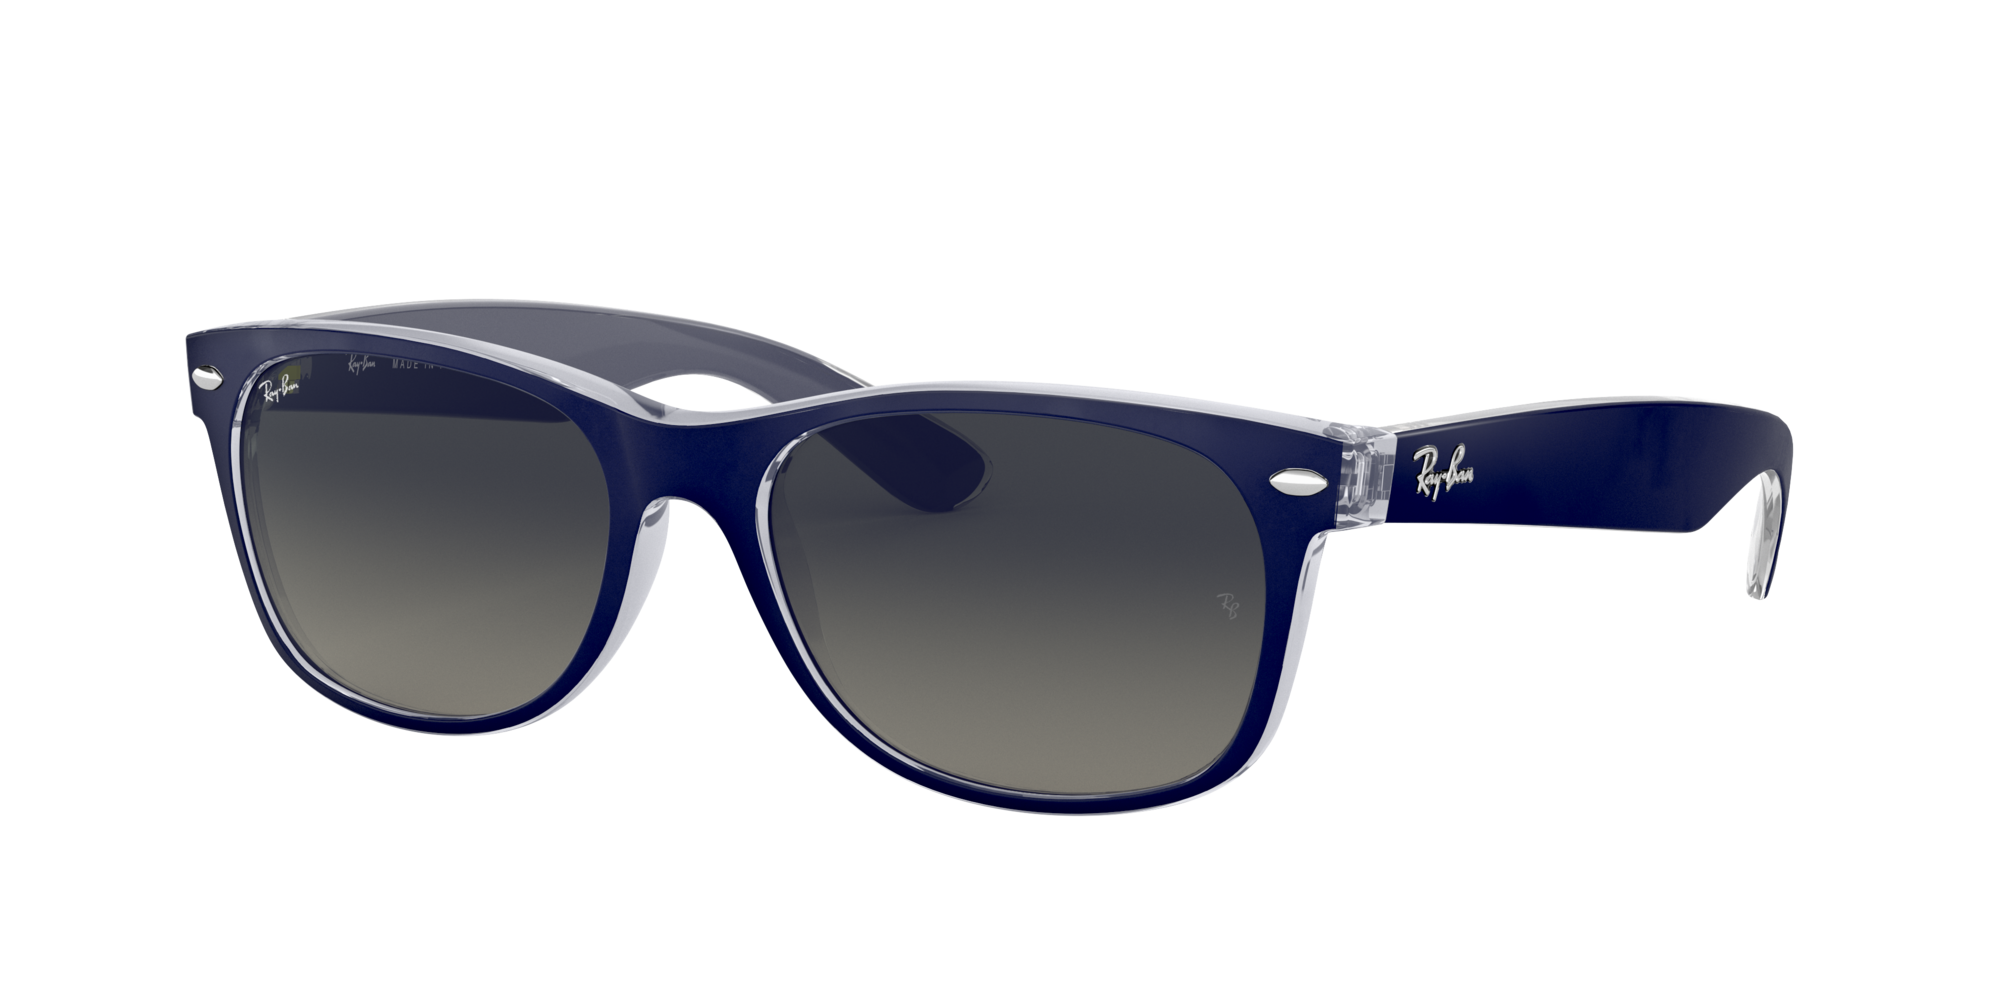 Ray-Ban 0RB2132 in Blue Sunglasses | OPSM